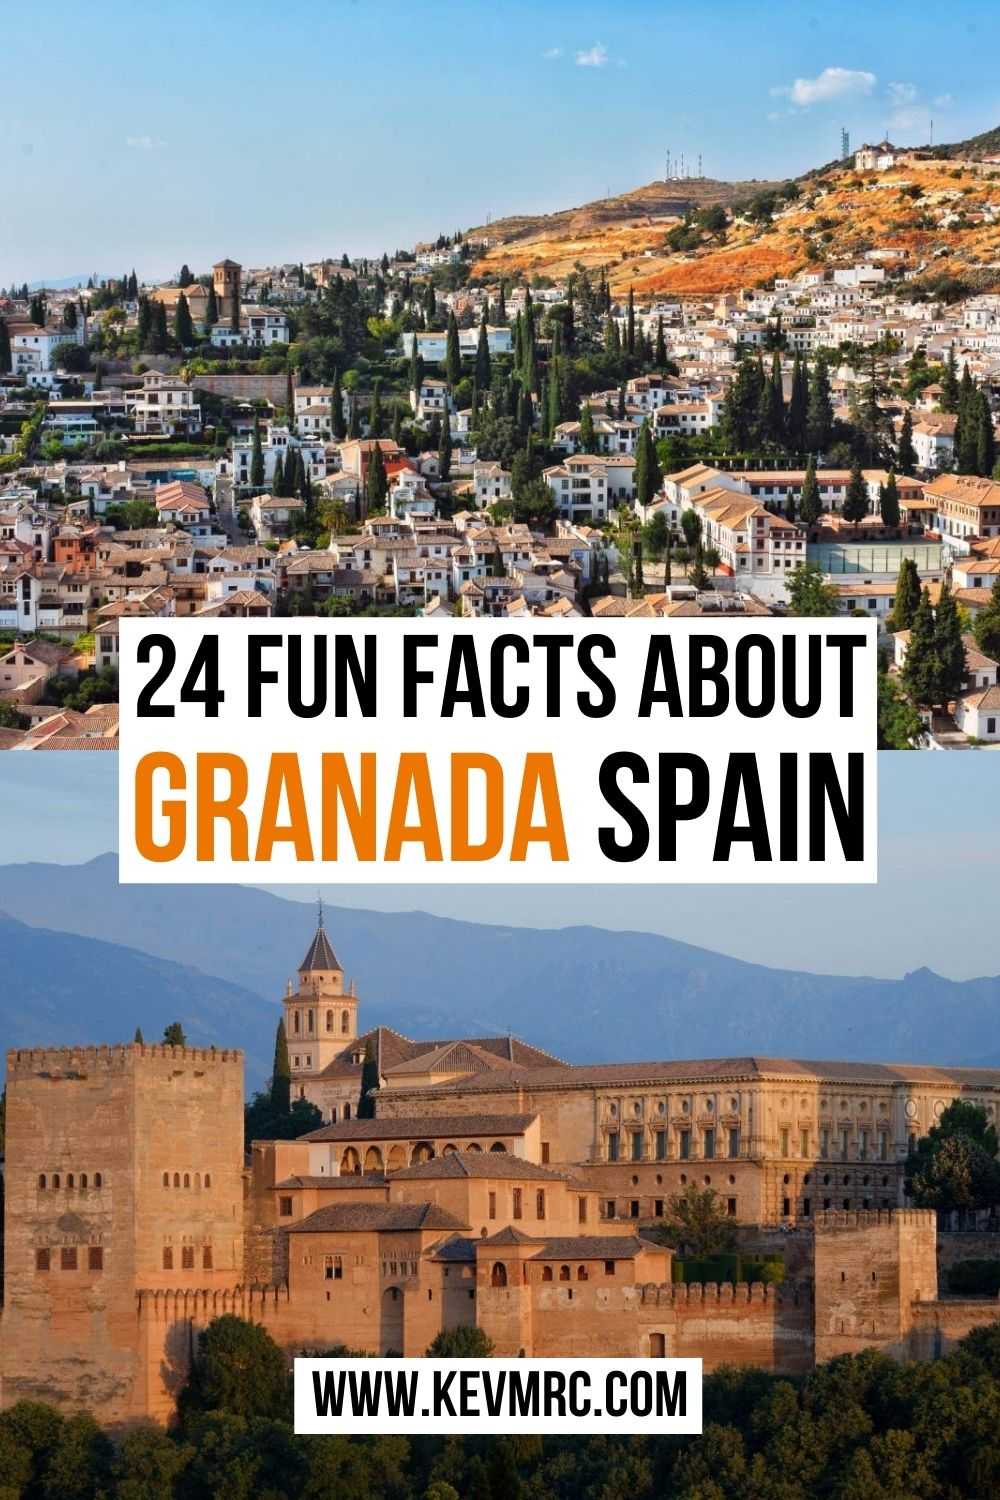 Located in the heart of Andalusia in Spain, Granada is a wonderful city with tons of features. Offering outstanding Moorish palaces, a ski resort in an incredible setting, peaceful gardens, and more, Granada is a must-see at least once in your life. Learn more with these 24 interesting facts about Granada Spain! granada spain facts | granada facts | spain facts fun | fun facts about spain #spainfacts #granada